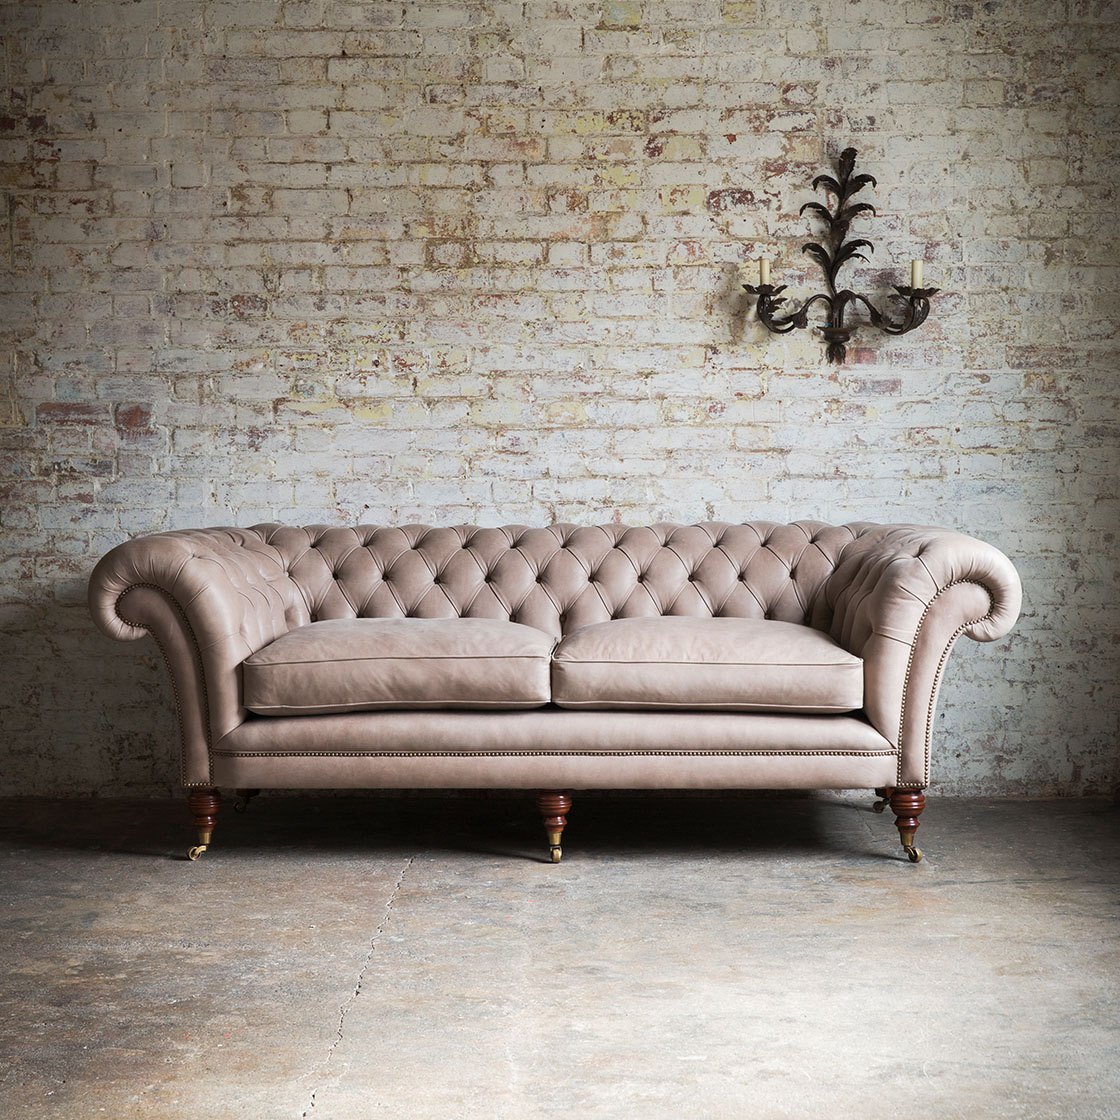 Grenville 3 seater sofa in Siena leather -Hare with Verona wall light - Beaumont & Fletcher